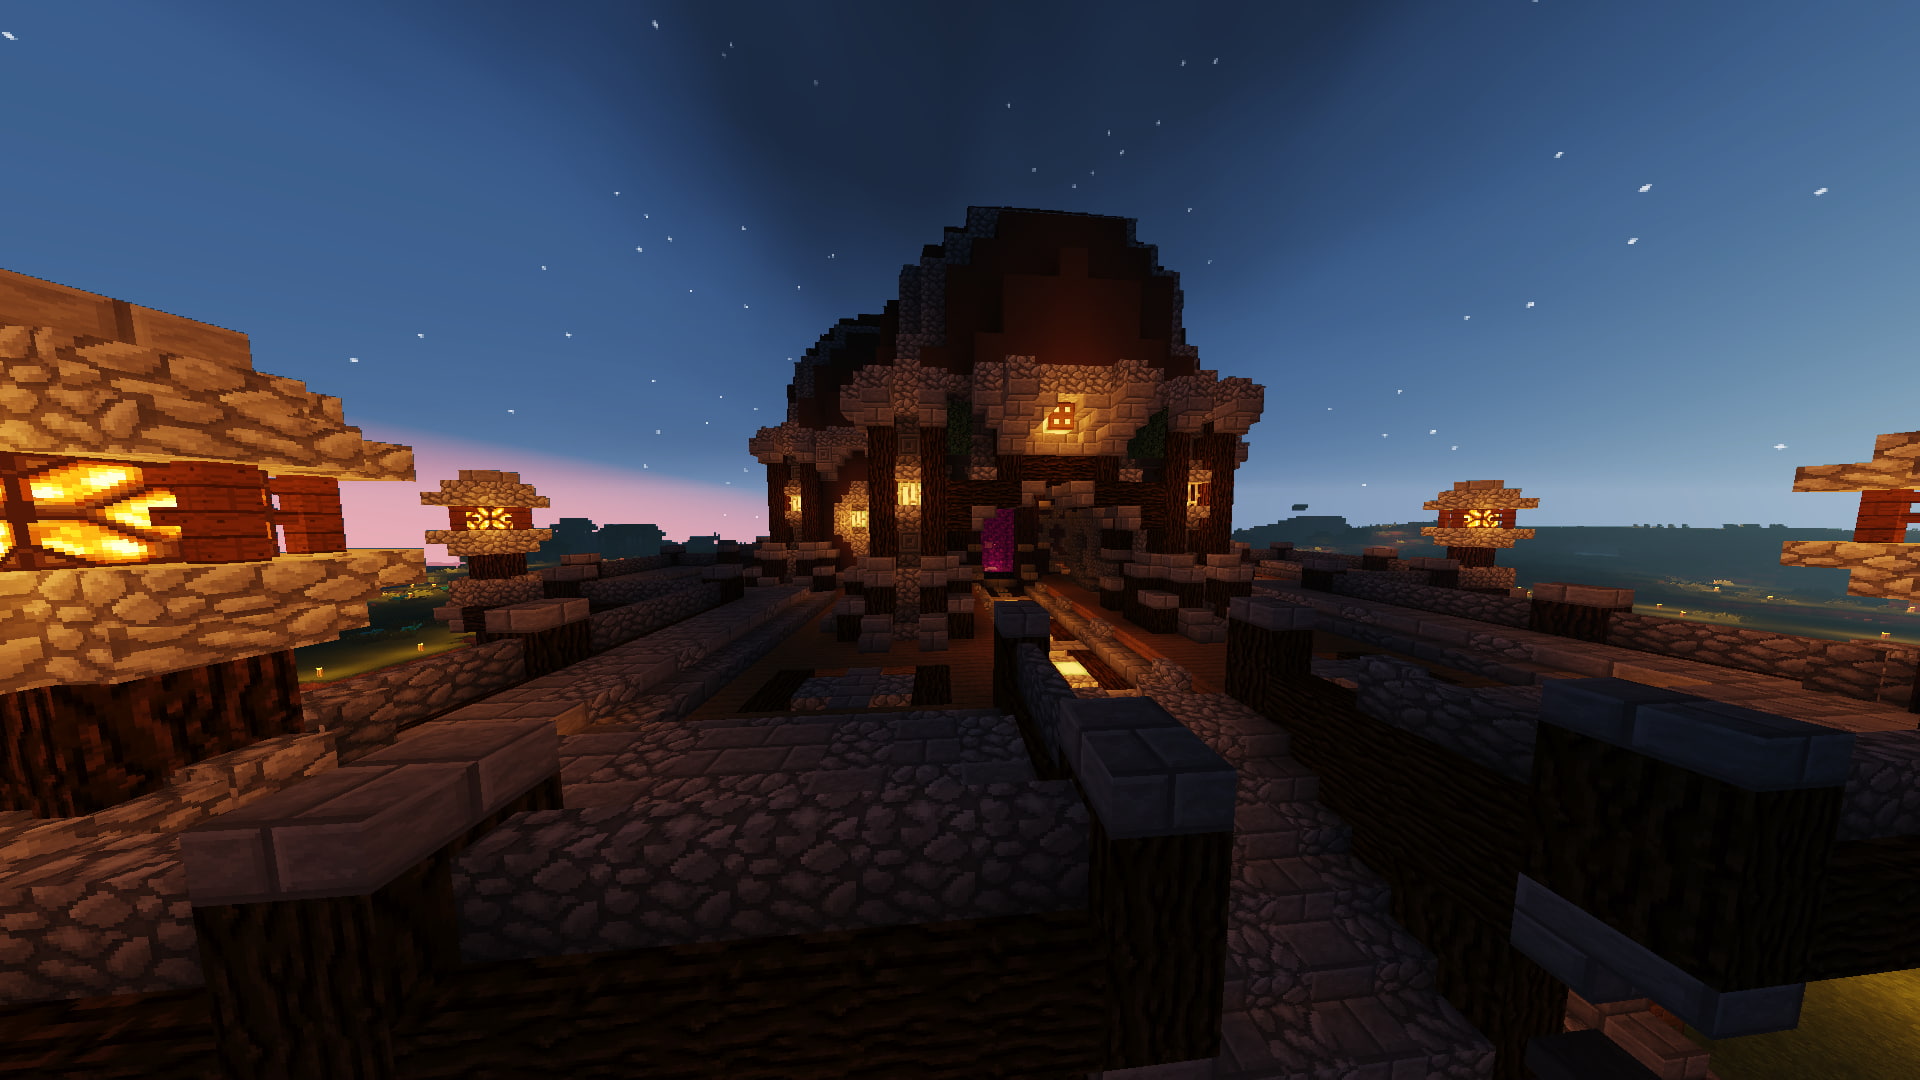 Minecraft, shaders, PC gaming, video games, screen shot